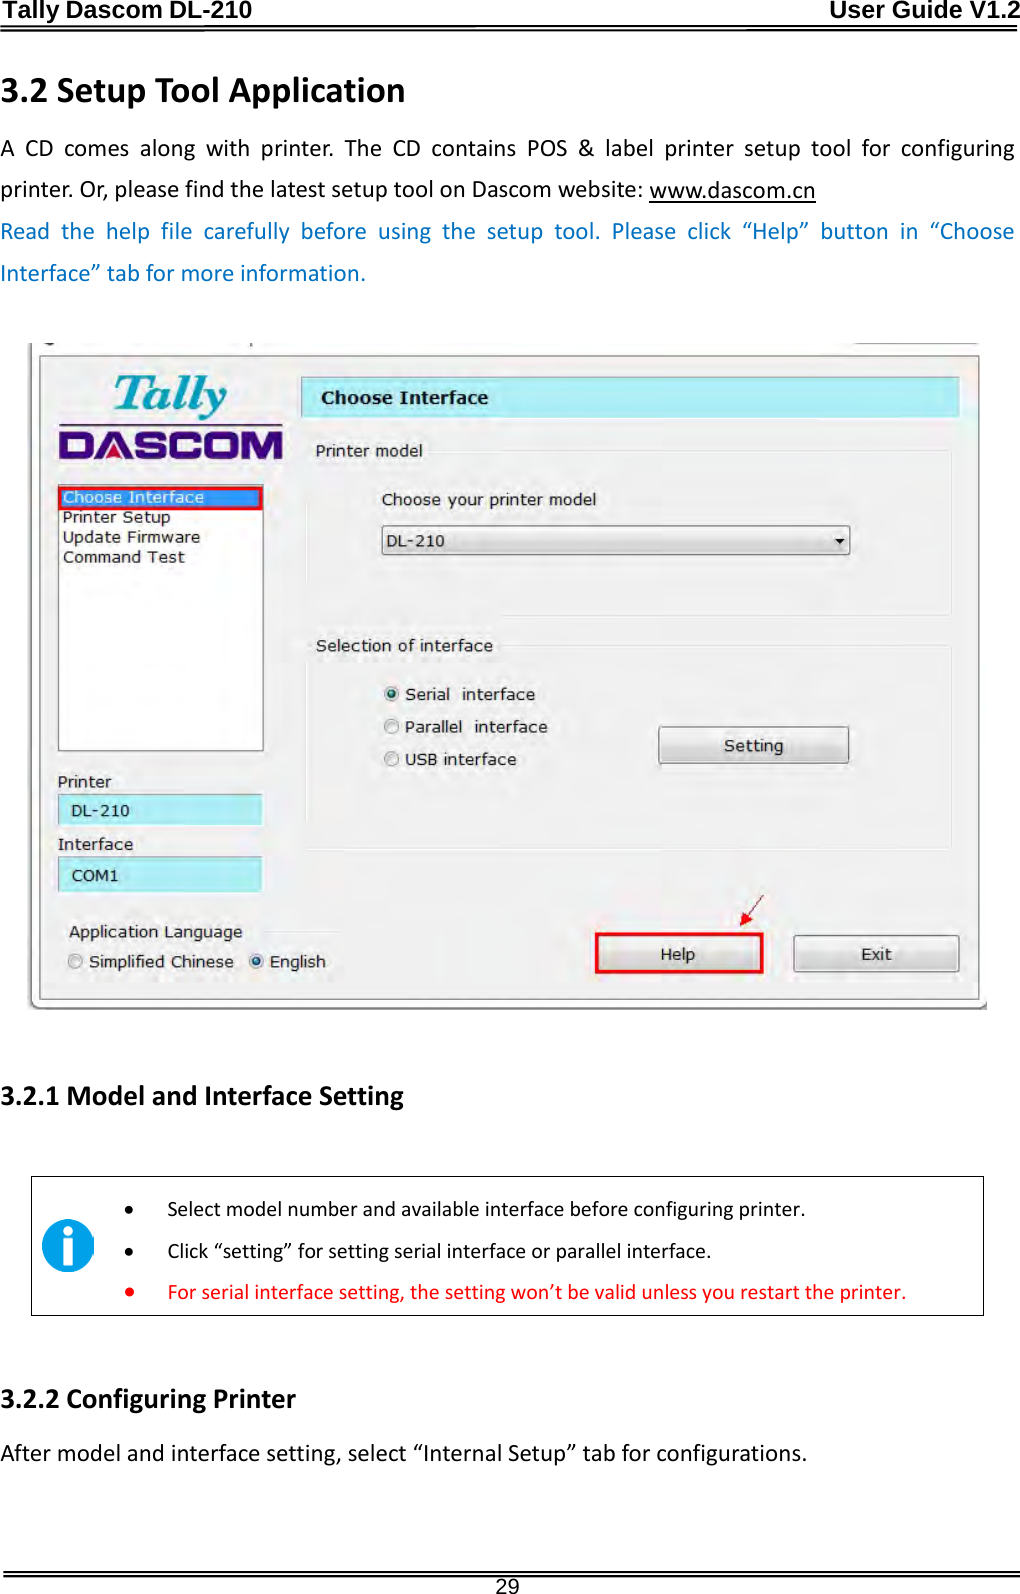 Tally Dascom DL-210                                              User Guide V1.2  29 3.2 Setup Tool Application A CD comes along with printer. The CD contains POS &amp; label printer setup tool for configuring printer. Or, please find the latest setup tool on Dascom website: www.dascom.cn Read the help file carefully before using the setup tool. Please click “Help”  button in “Choose Interface” tab for more information.    3.2.1 Model and Interface Setting   • Select model number and available interface before configuring printer. • Click “setting” for setting serial interface or parallel interface. • For serial interface setting, the setting won’t be valid unless you restart the printer.  3.2.2 Configuring Printer After model and interface setting, select “Internal Setup” tab for configurations.   